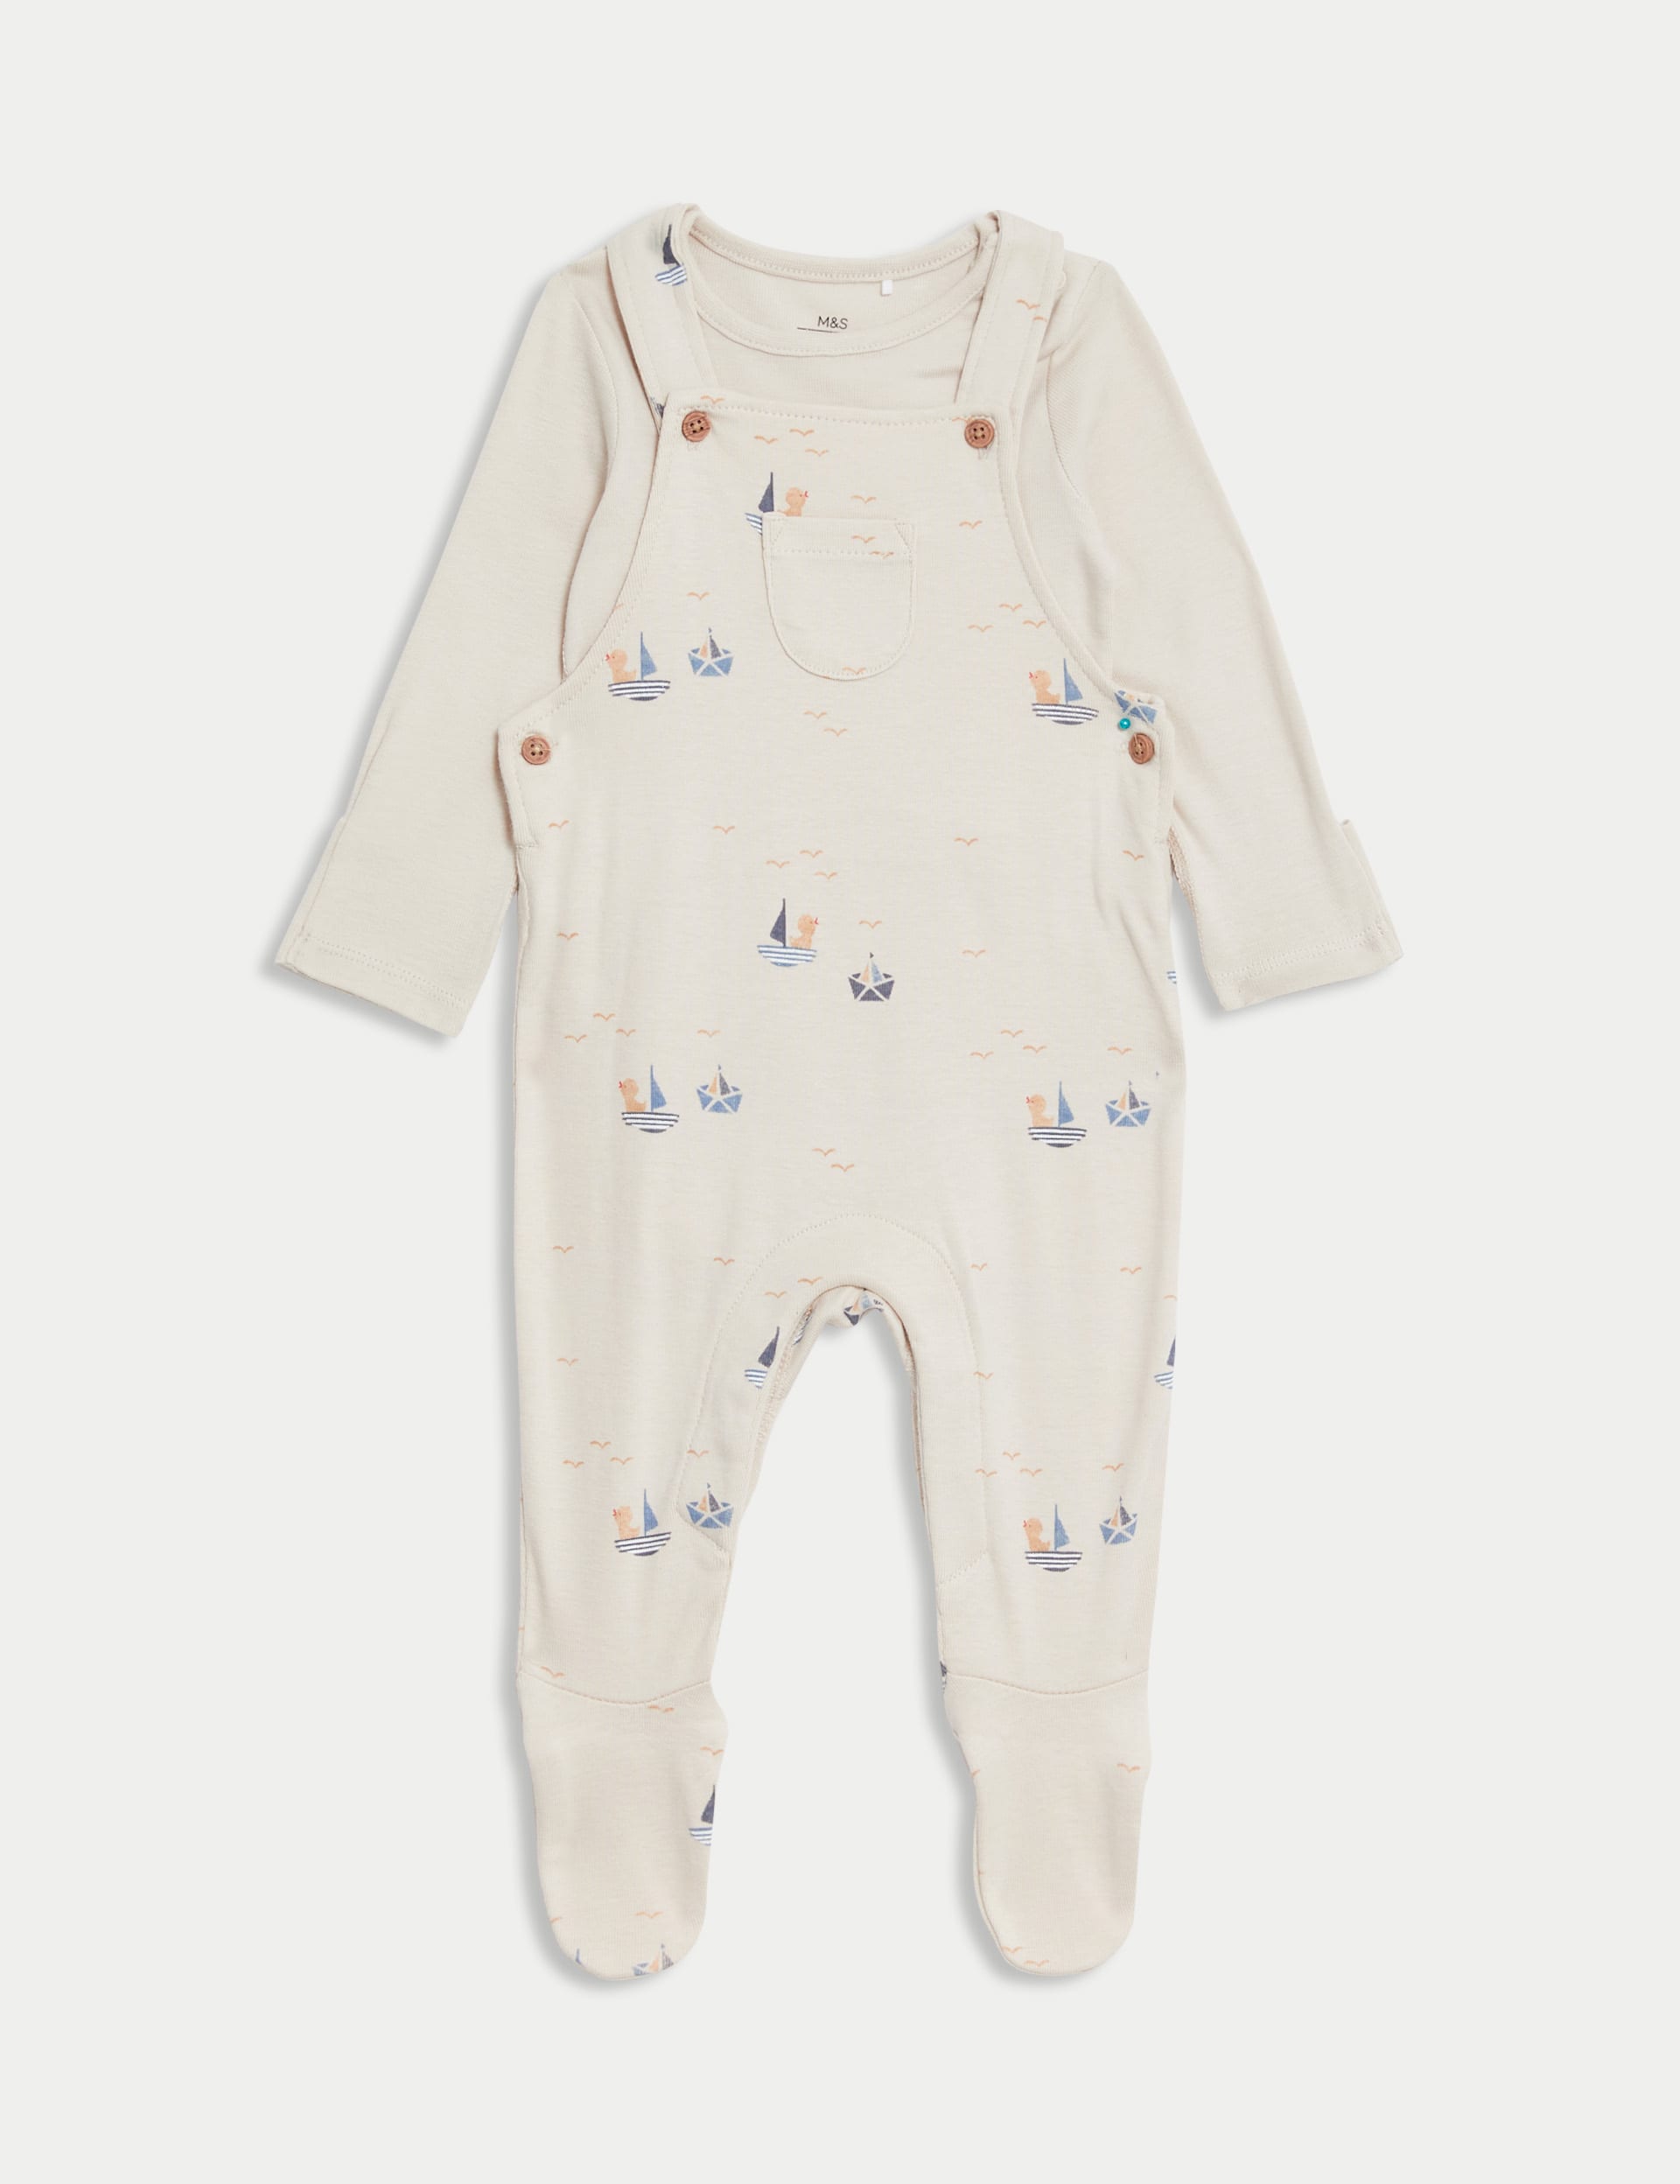 2pc Pure Cotton Boat Outfit (7lbs-1 Yrs)